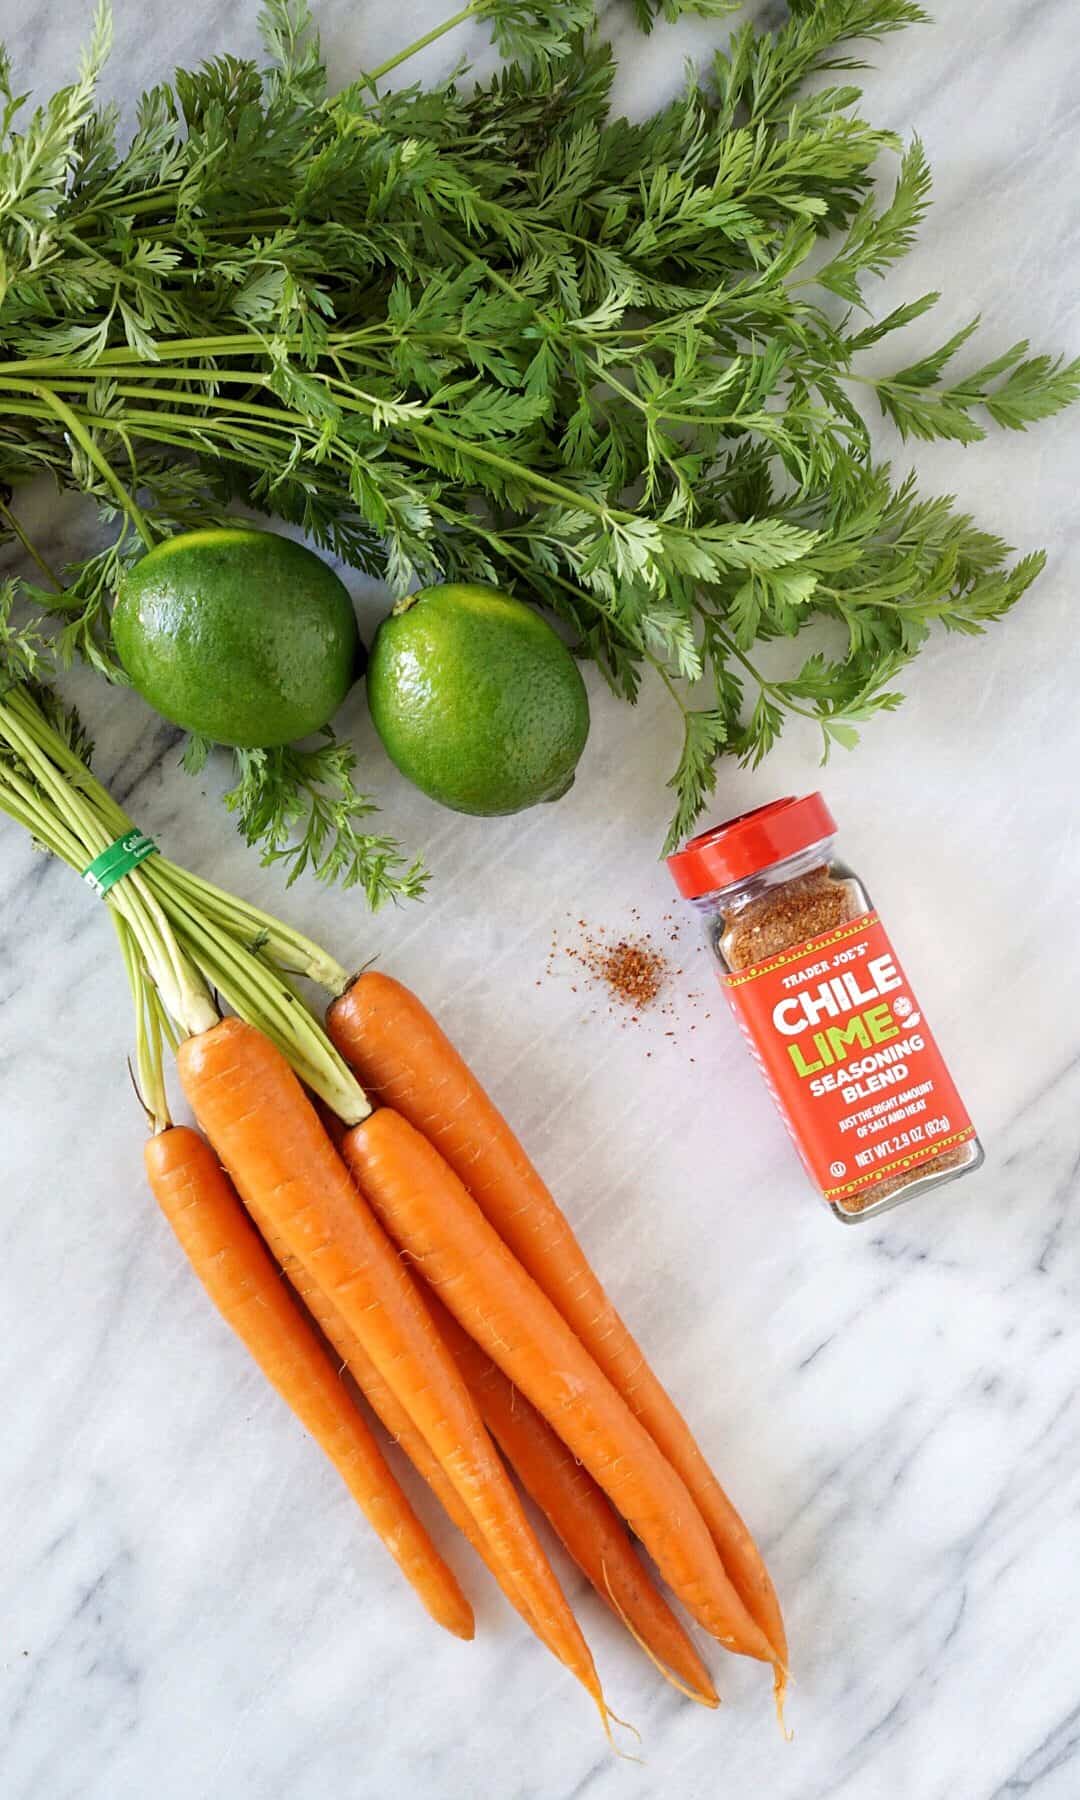 Carrots, limes, and seasoning on a marble board